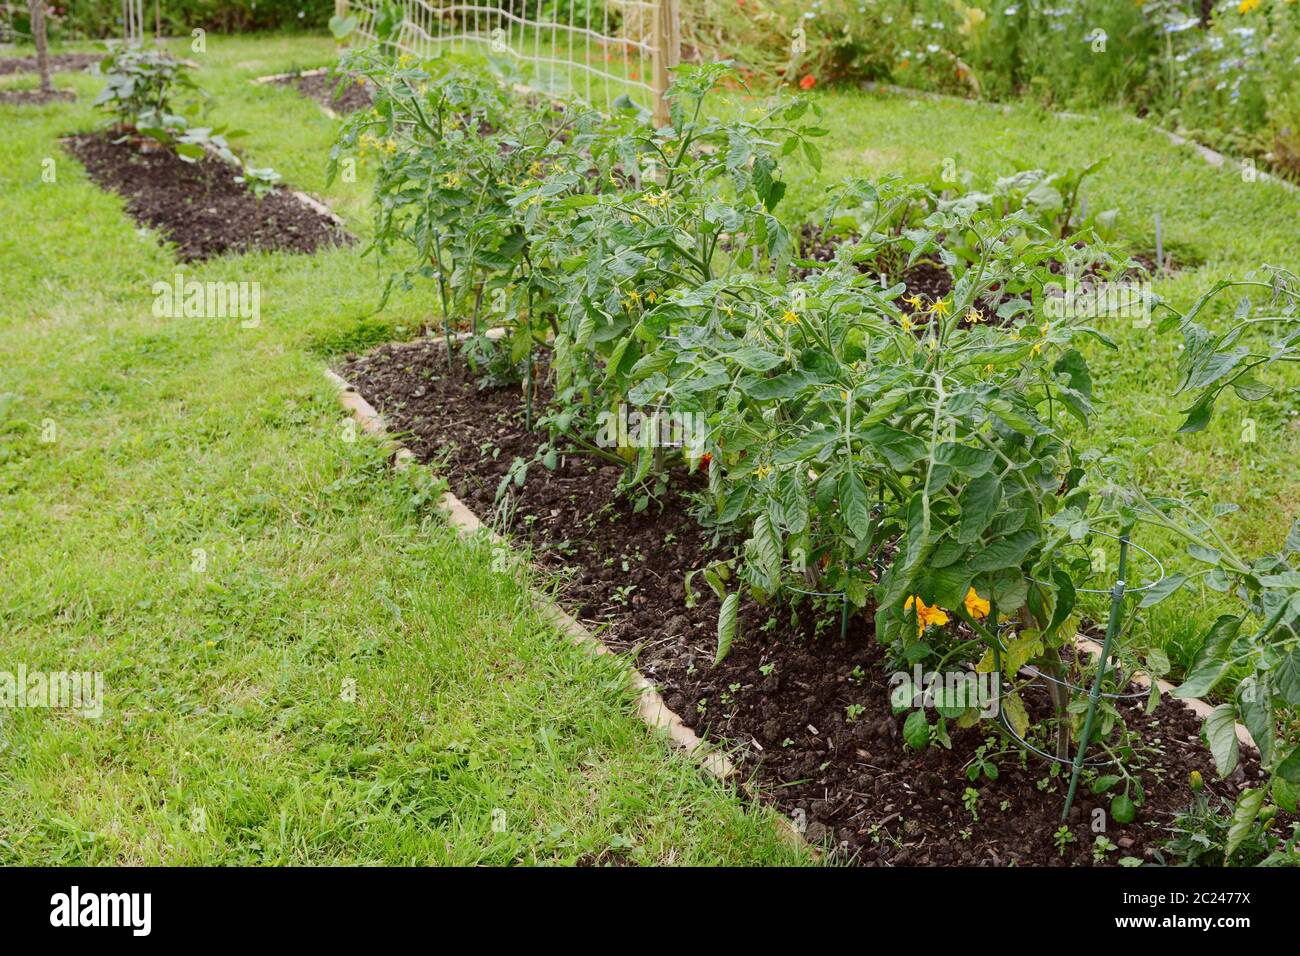 Row of Red Alert cherry tomato plants growing in a tidy rural allotment Stock Photo